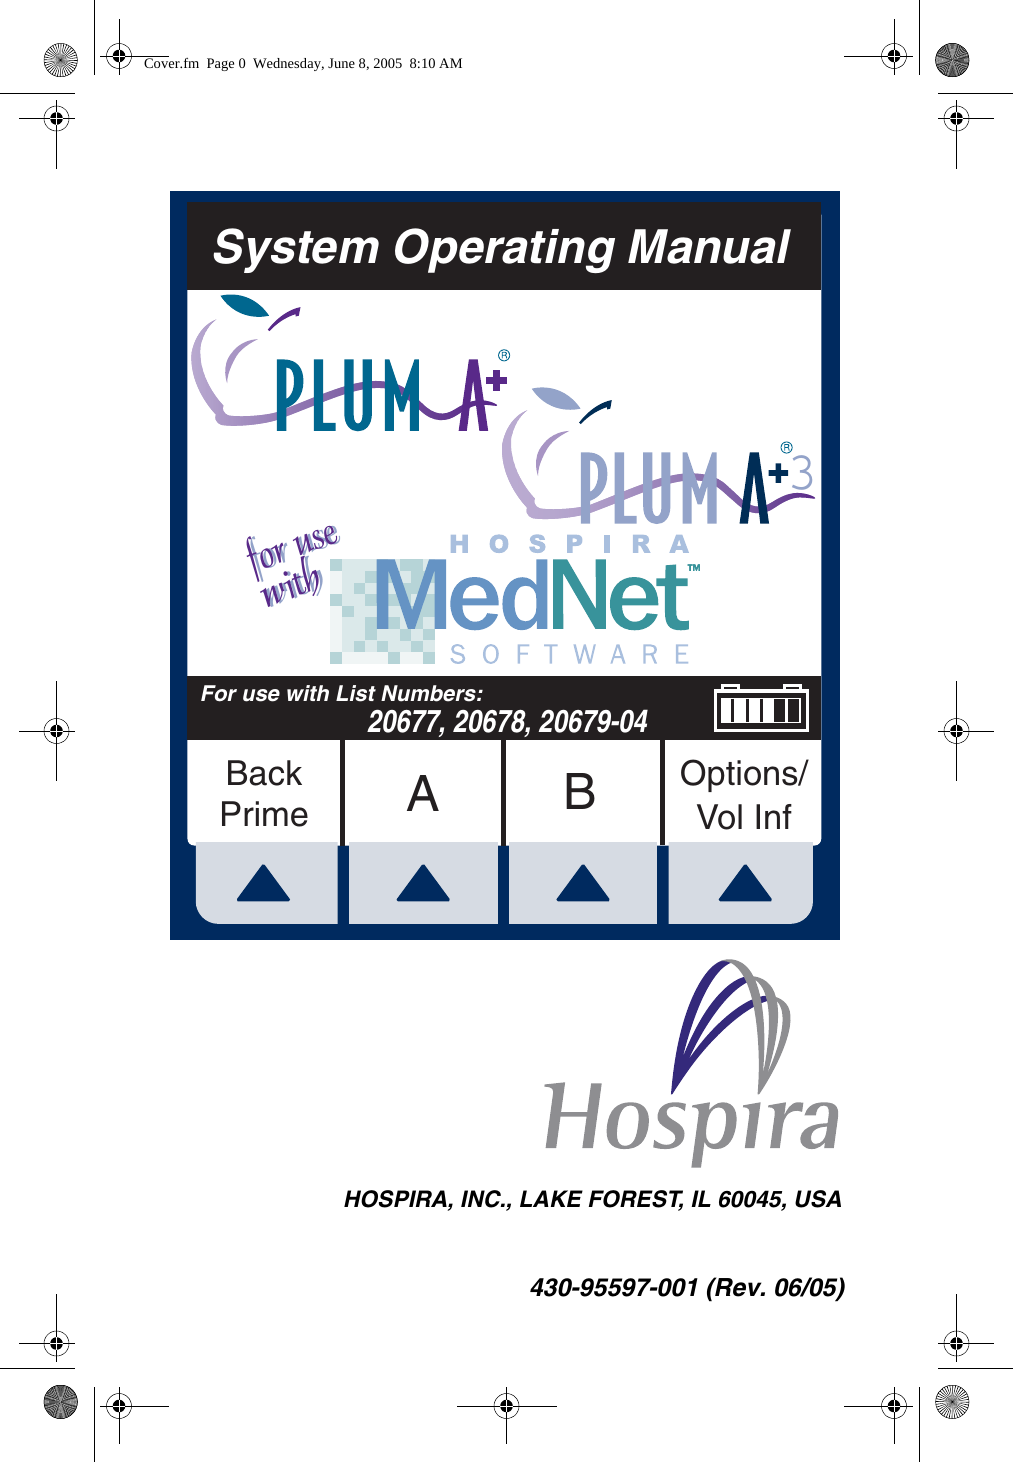 430-95597-001 (Rev. 06/05)ABOptions/Vol InfBackPrimeFor use with List Numbers:                           20677, 20678, 20679-04System Operating Manualfor usewithfor usewith3HOSPIRA, INC., LAKE FOREST, IL 60045, USACover.fm  Page 0  Wednesday, June 8, 2005  8:10 AM